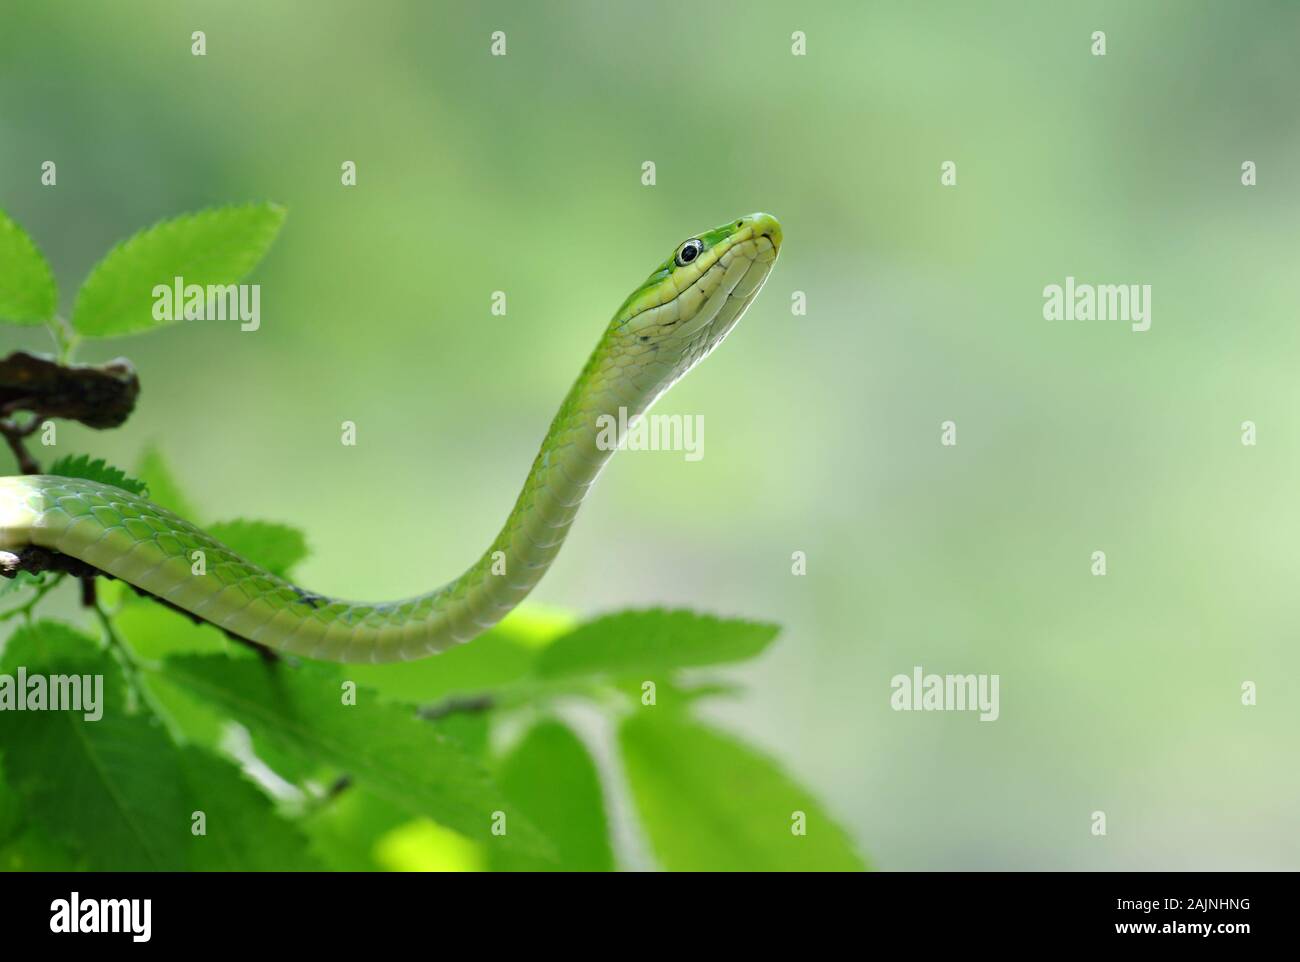 Closeup macro of a harmless green snake on a leafy branch Stock Photo